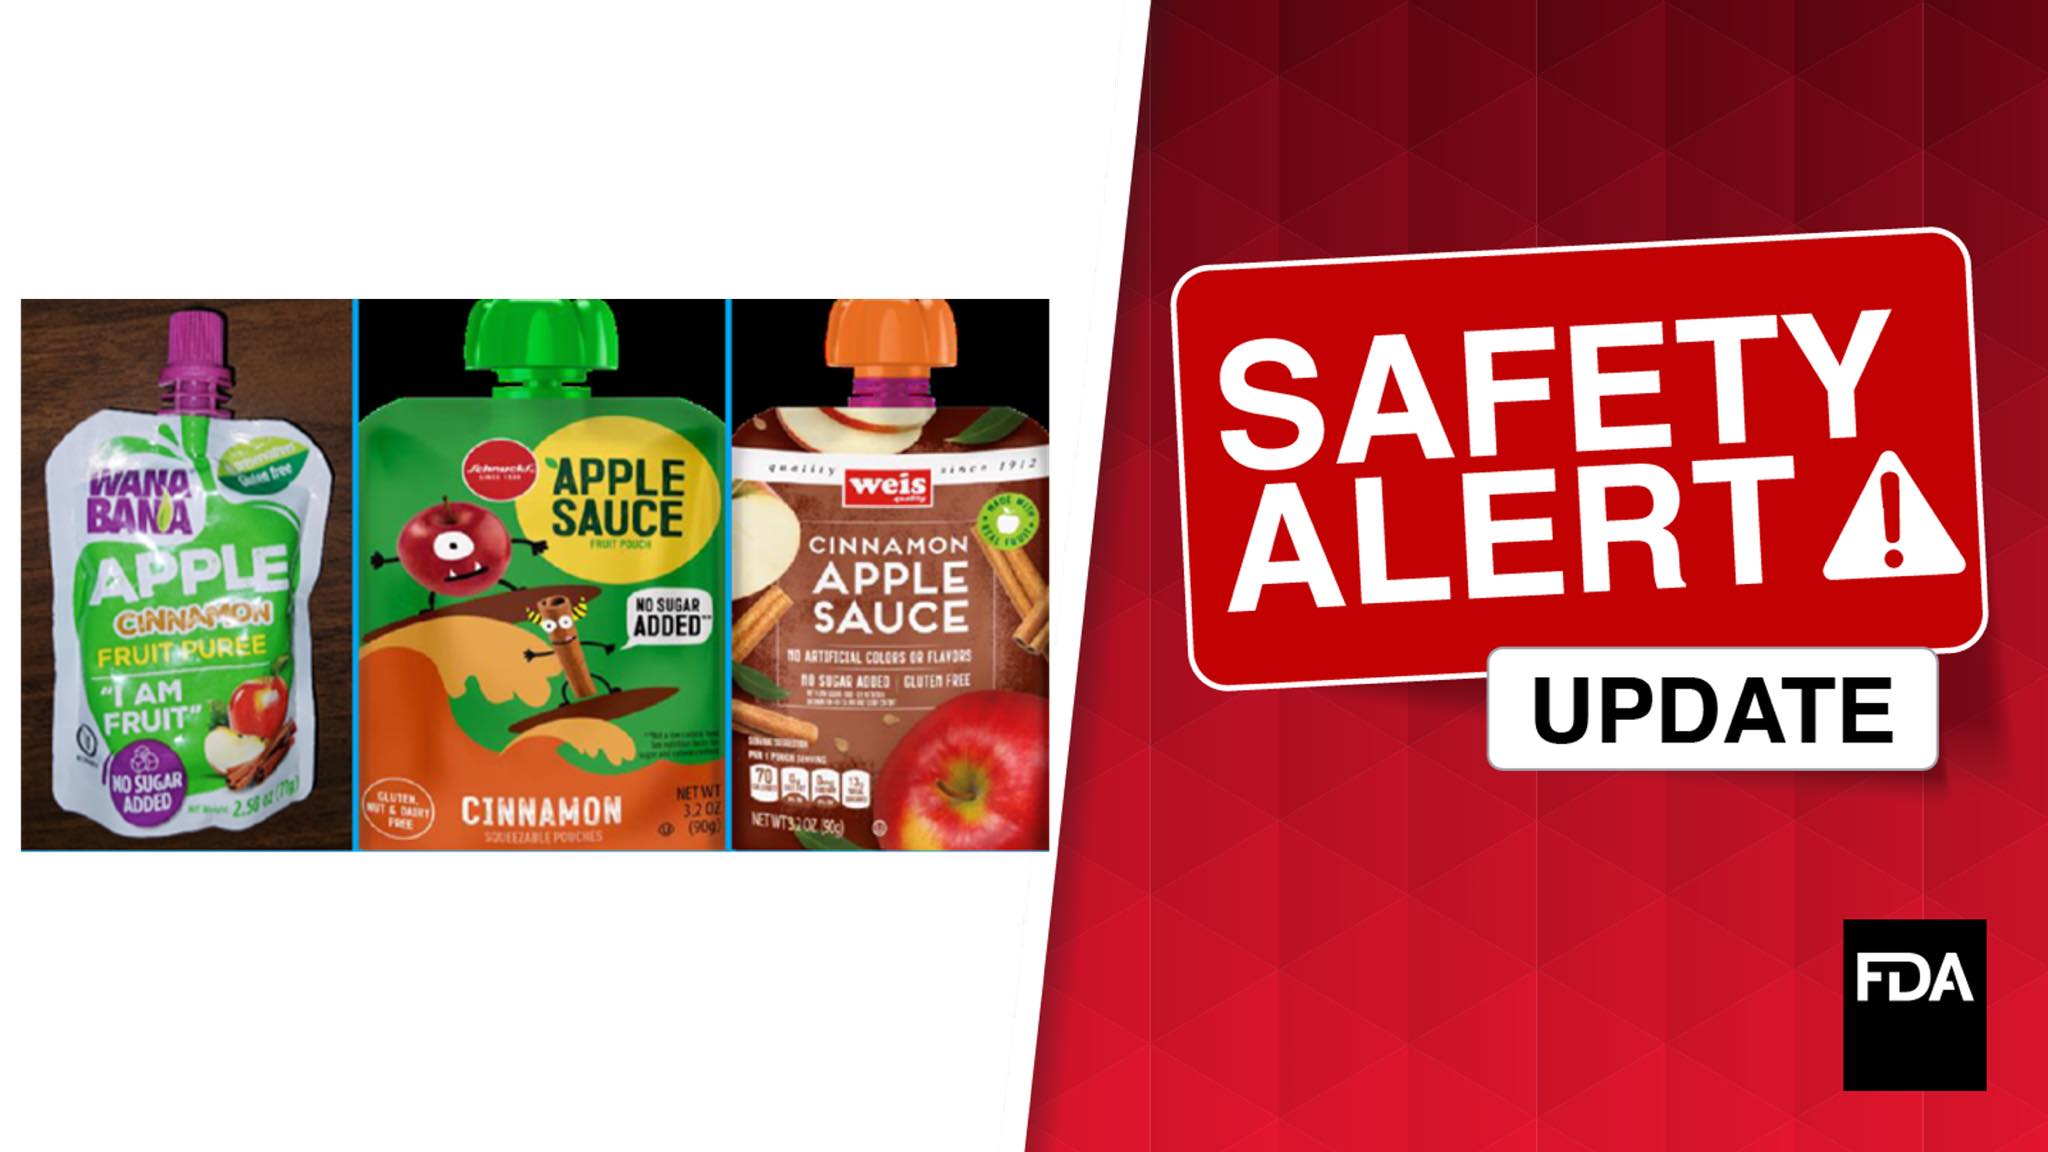 DPH Investigating Possible Lead Poisoning from Cinnamon Applesauce Pouch Products